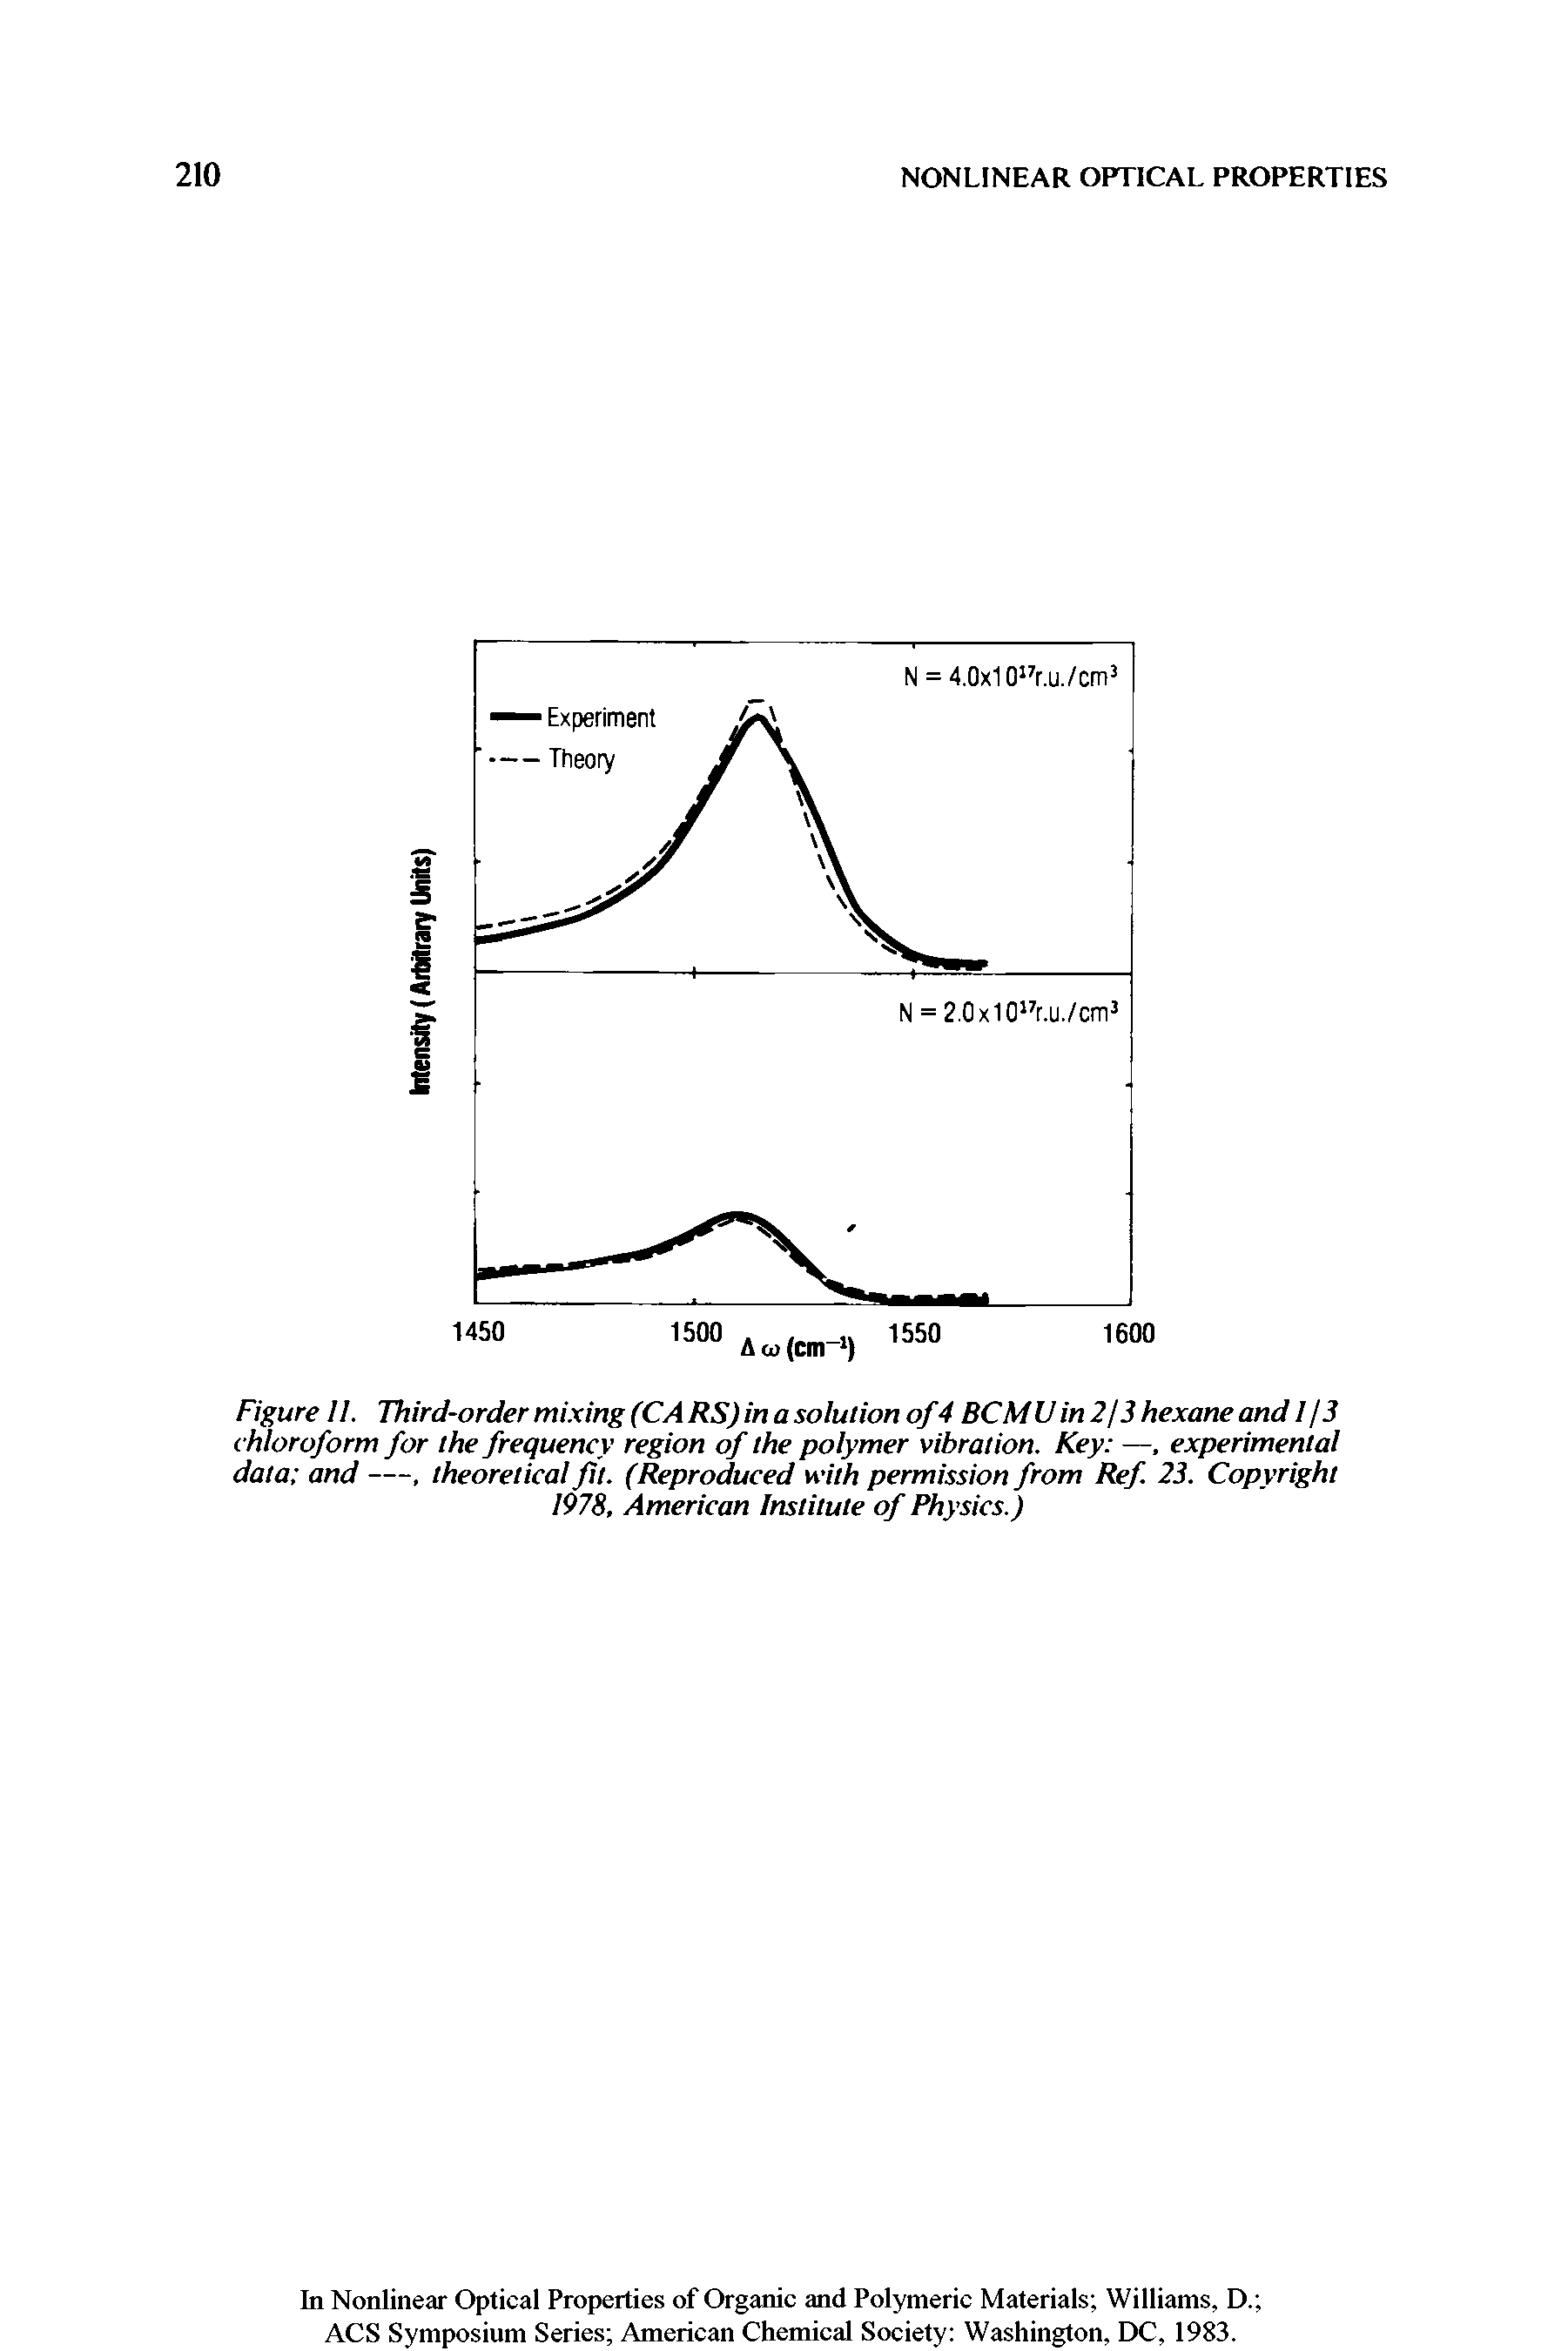 Figure II. Third-order mixing (CARS) in a solution of4 BCMU in2 / 3 hexane and 1 / 3 chloroform for the frequency region of the polymer vibration. Key —, experimental data and —, theoretical fit. (Reproduced with permission from Ref 23. Copyright 1978, American Institute of Physics.)...